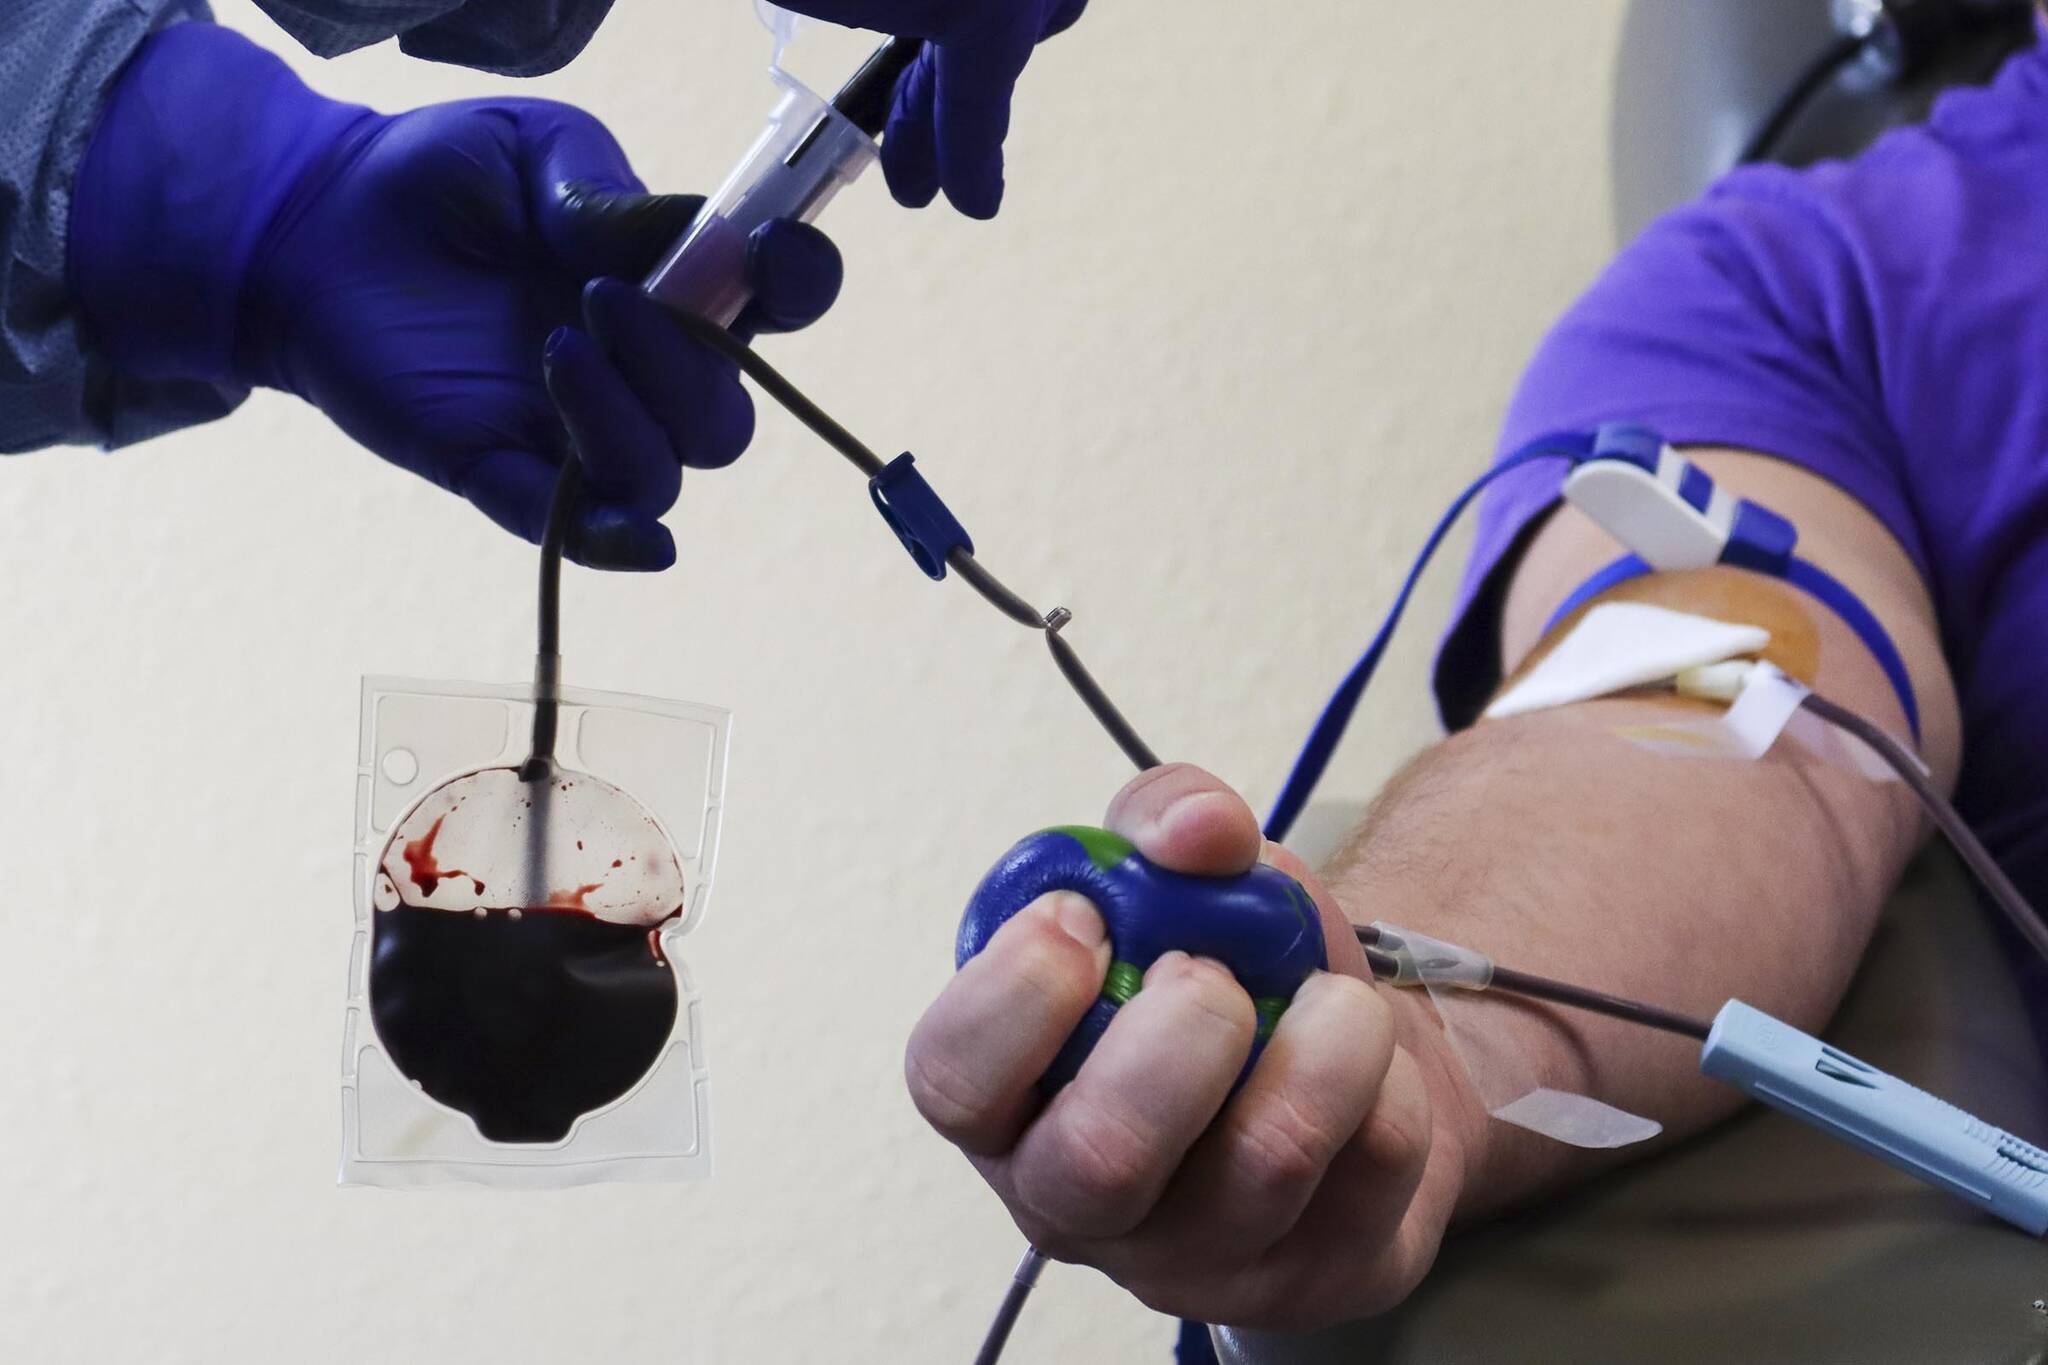 A donor gives blood at the Blood Bank of Alaska’s Juneau center on Aug. 18, 2021. Summer months especially prove challenging for critical blood donations. (Ben Hohenstatt / Juneau Empire File)